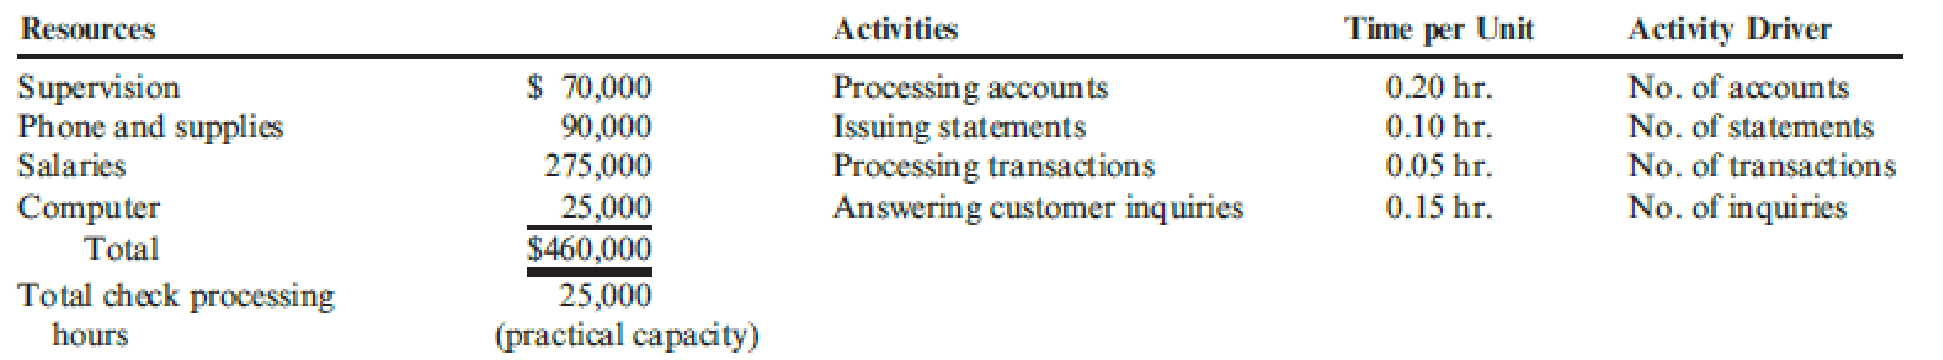 Chapter 4, Problem 7CE, Golding Bank provided the following data about its resources and activities for its checking account 